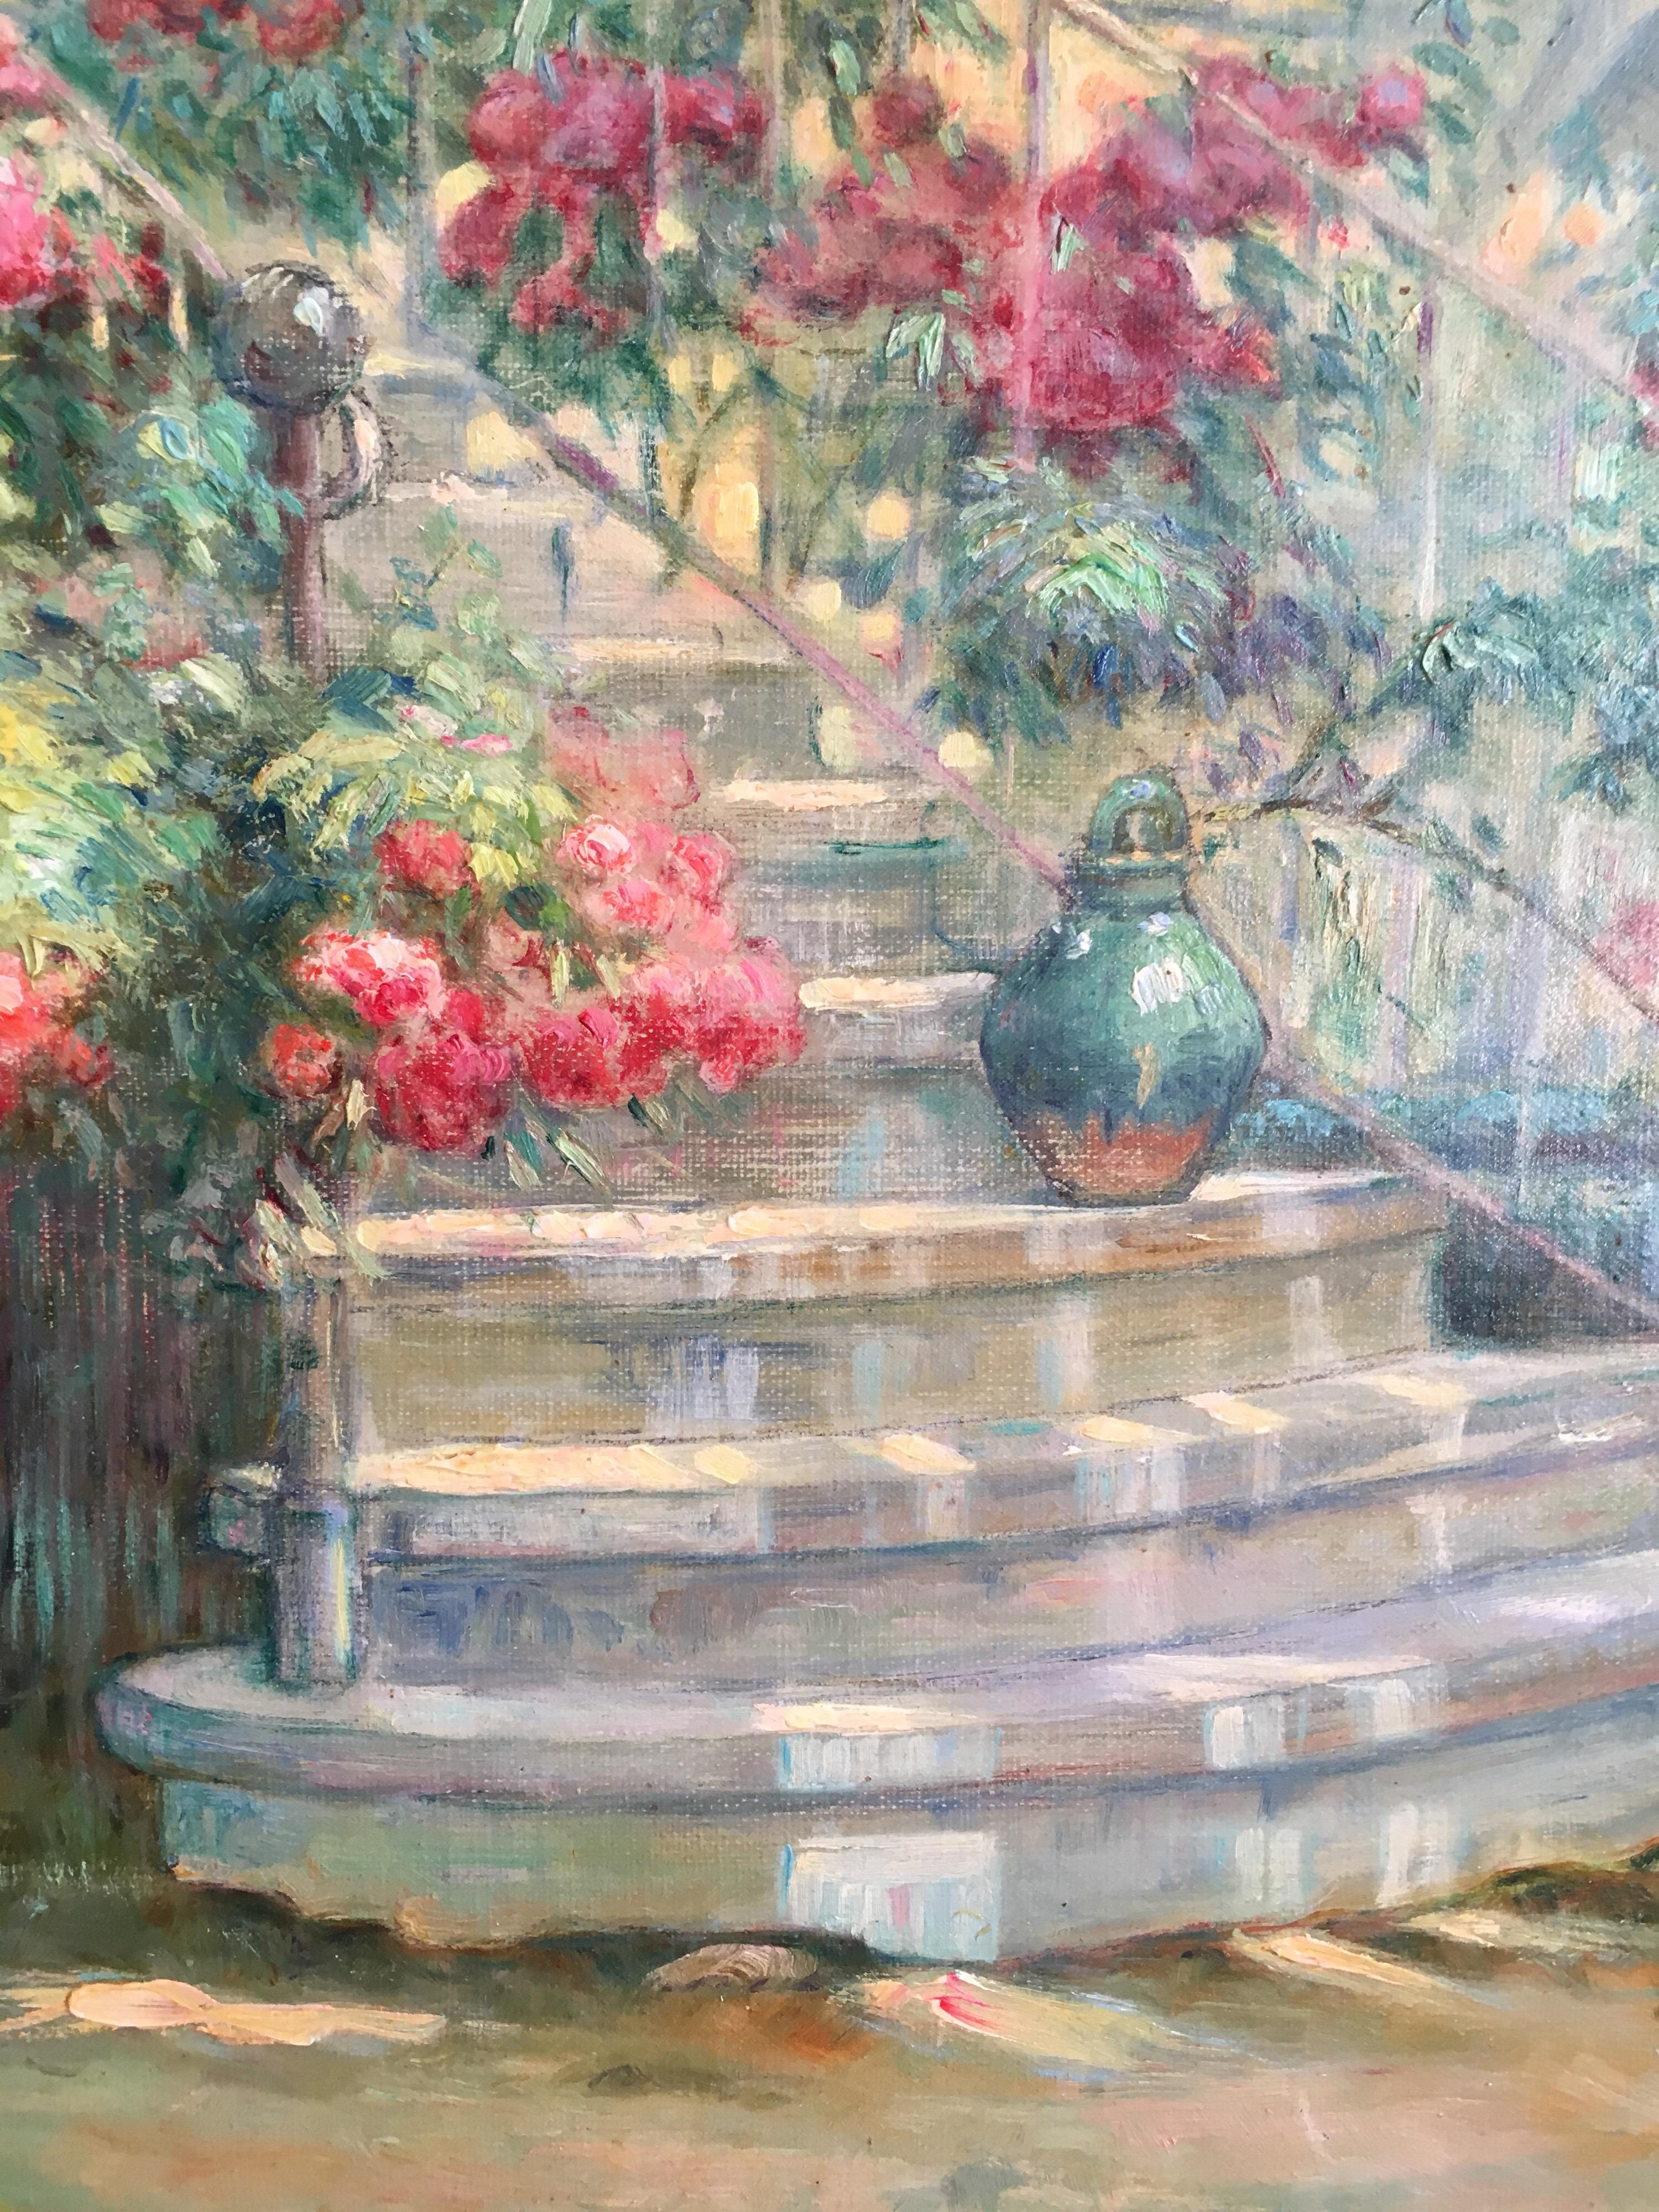 The Garden Steps
By Jean Galland (French 1880-1958) 
Signed and dated '1923' by the artist on the lower right hand corner
Oil painting on canvas, framed
Framed size: 37 x 30.5 inches
exhibited in Lyon in the 1920's. 

Fabulous French Impressionist